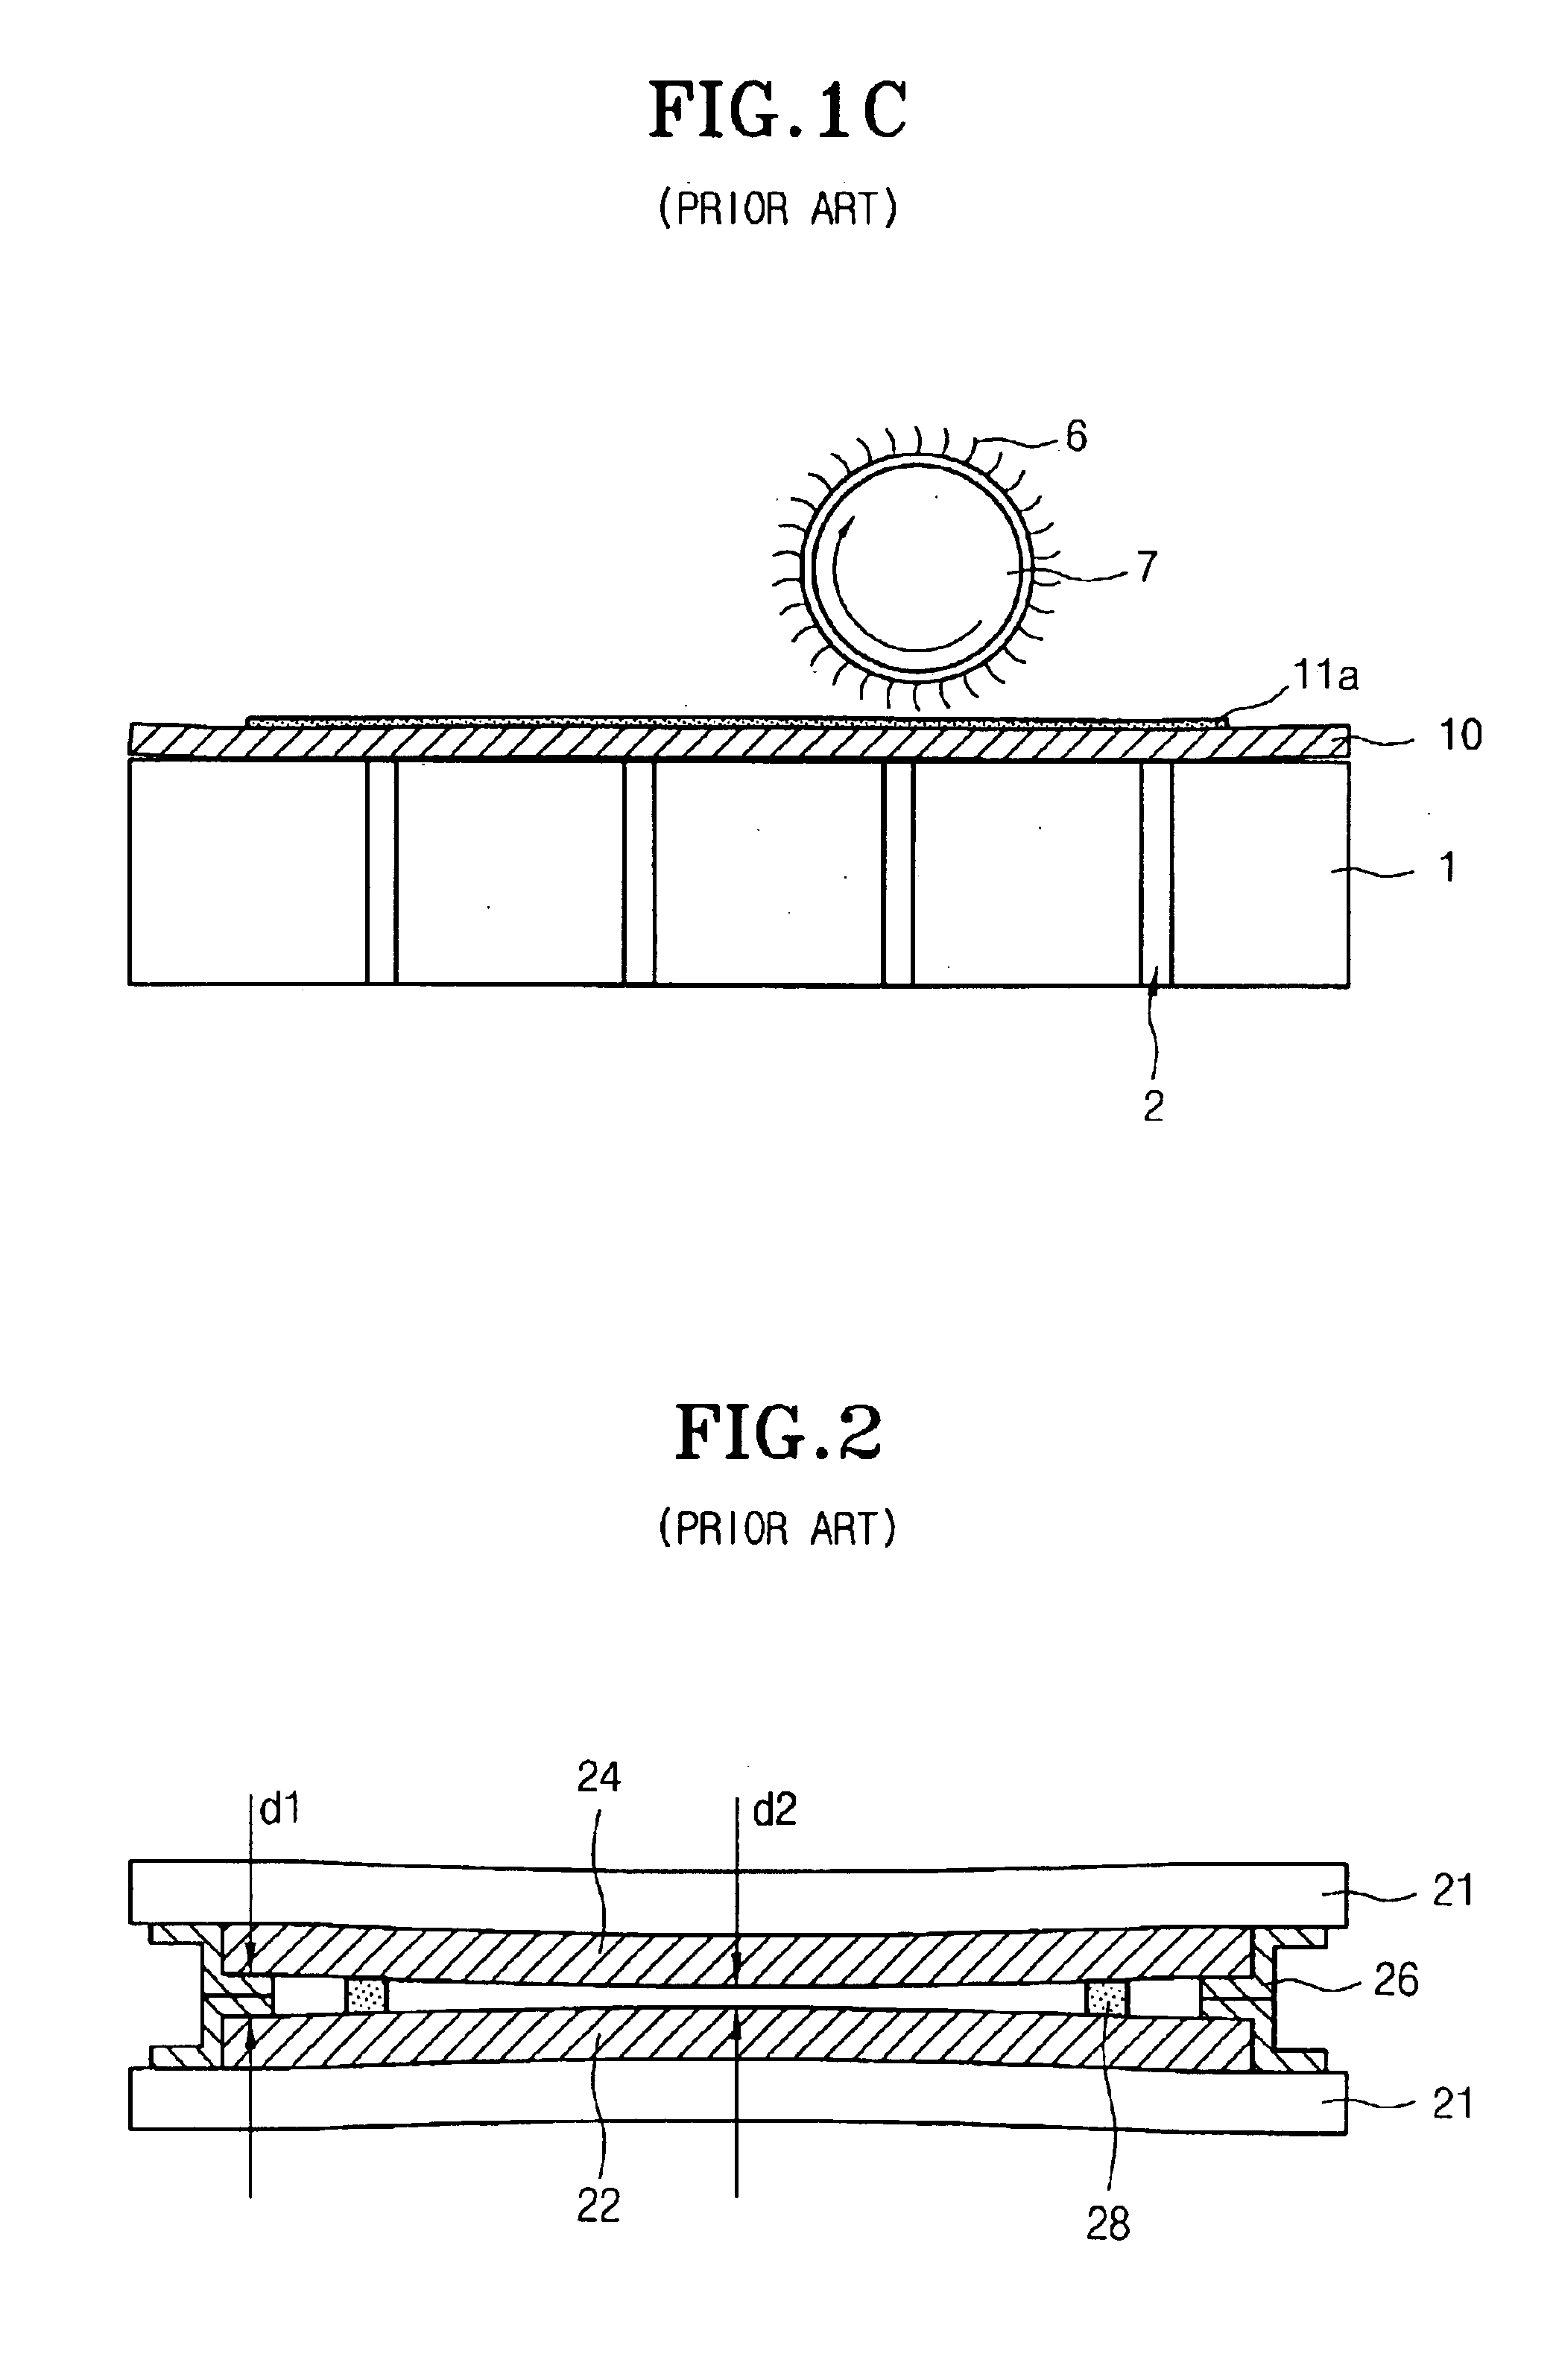 Liquid crystal display device with plastic substrate